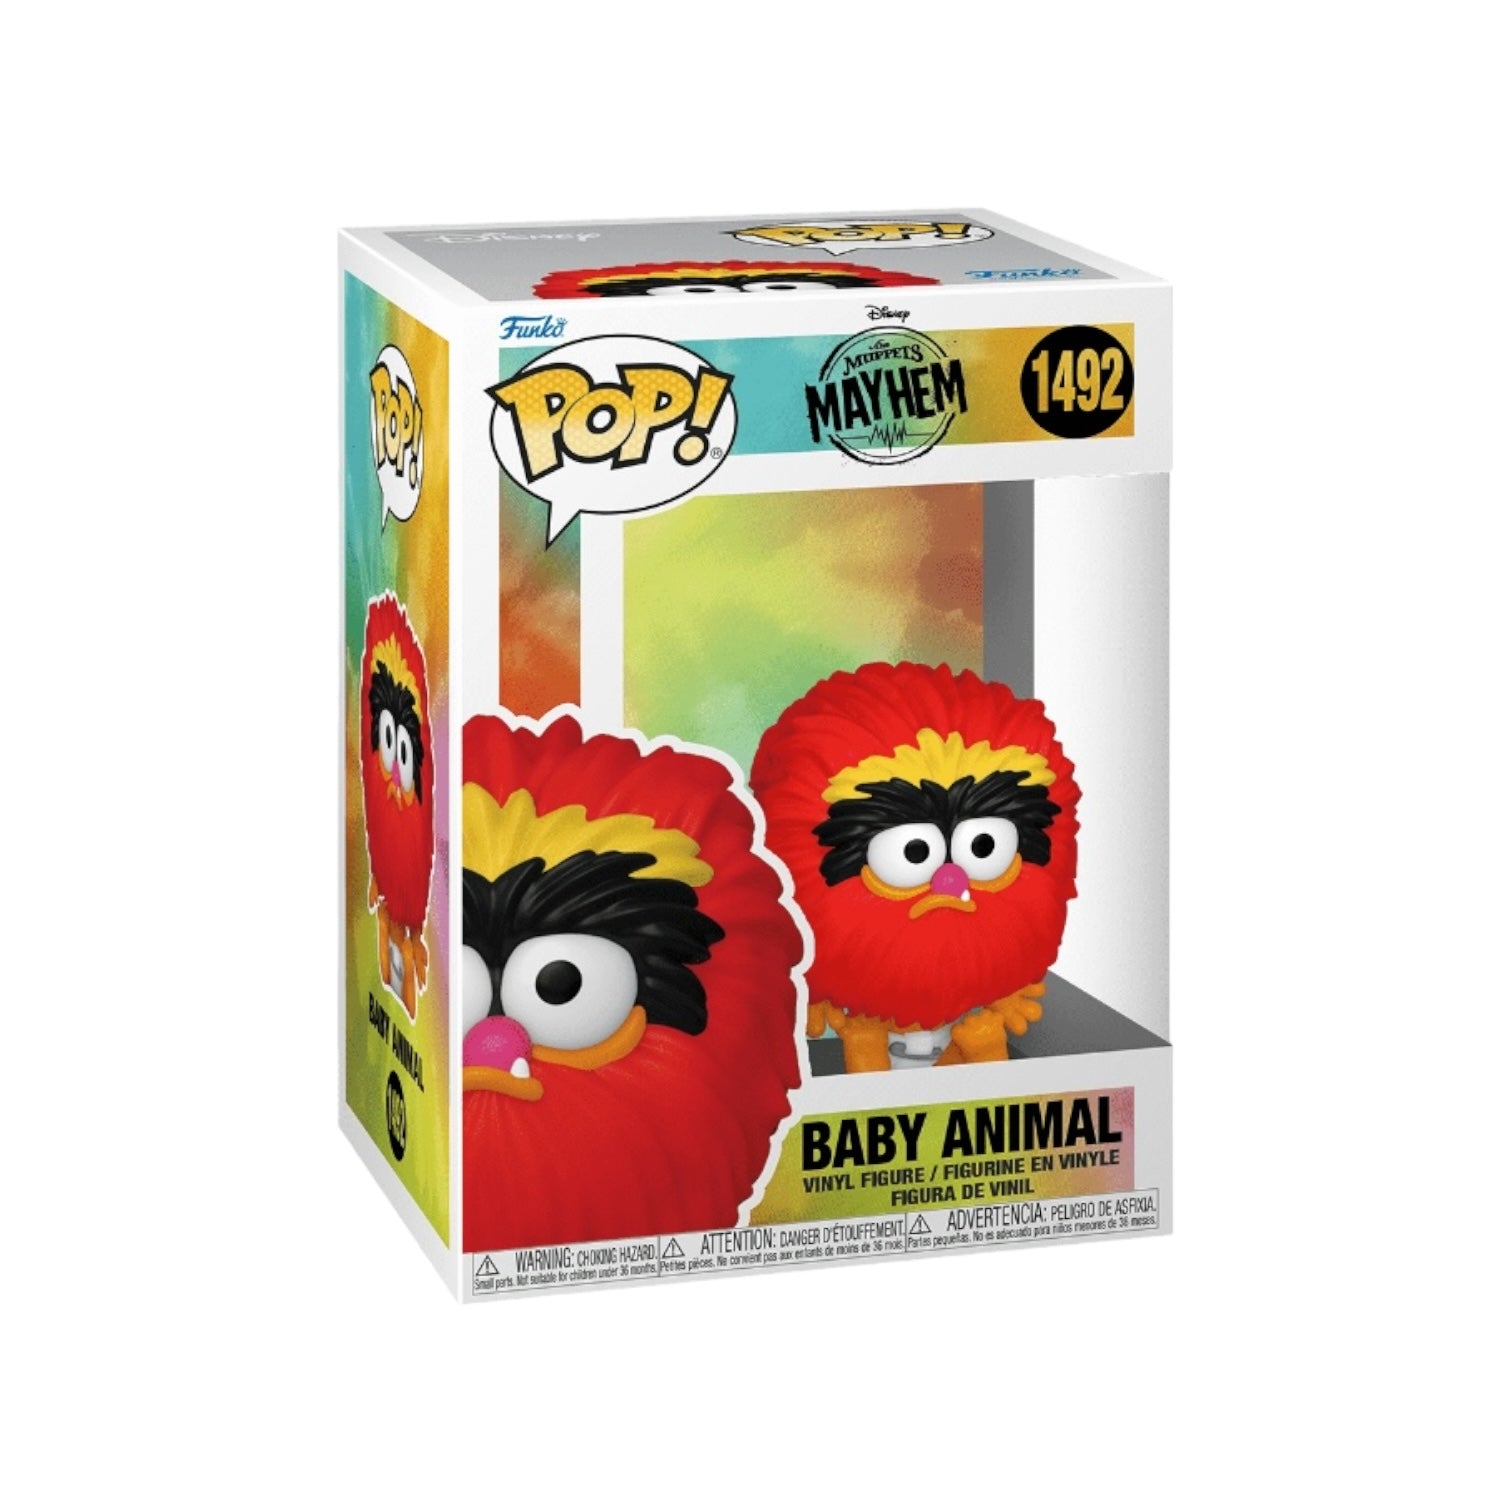 Baby Animal #1492 Funko Pop! - The Muppets